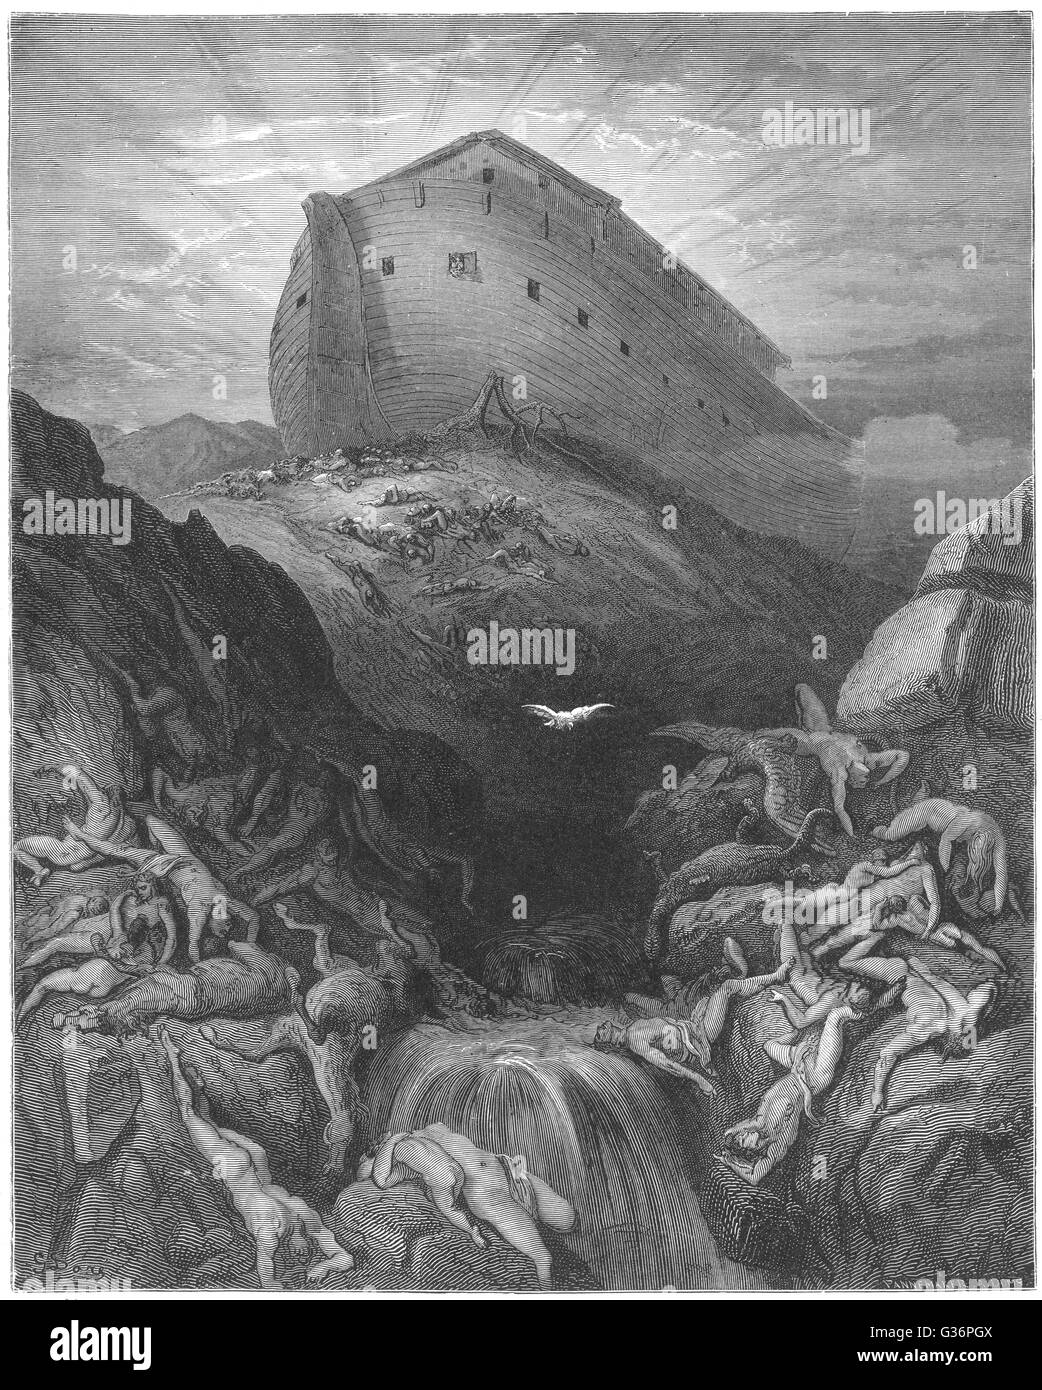 Old Testament -- Noah's Ark, resting on Mount Ararat after the Deluge, with the bodies of drowned people littering the landscape.           Date: Old Testament Stock Photo